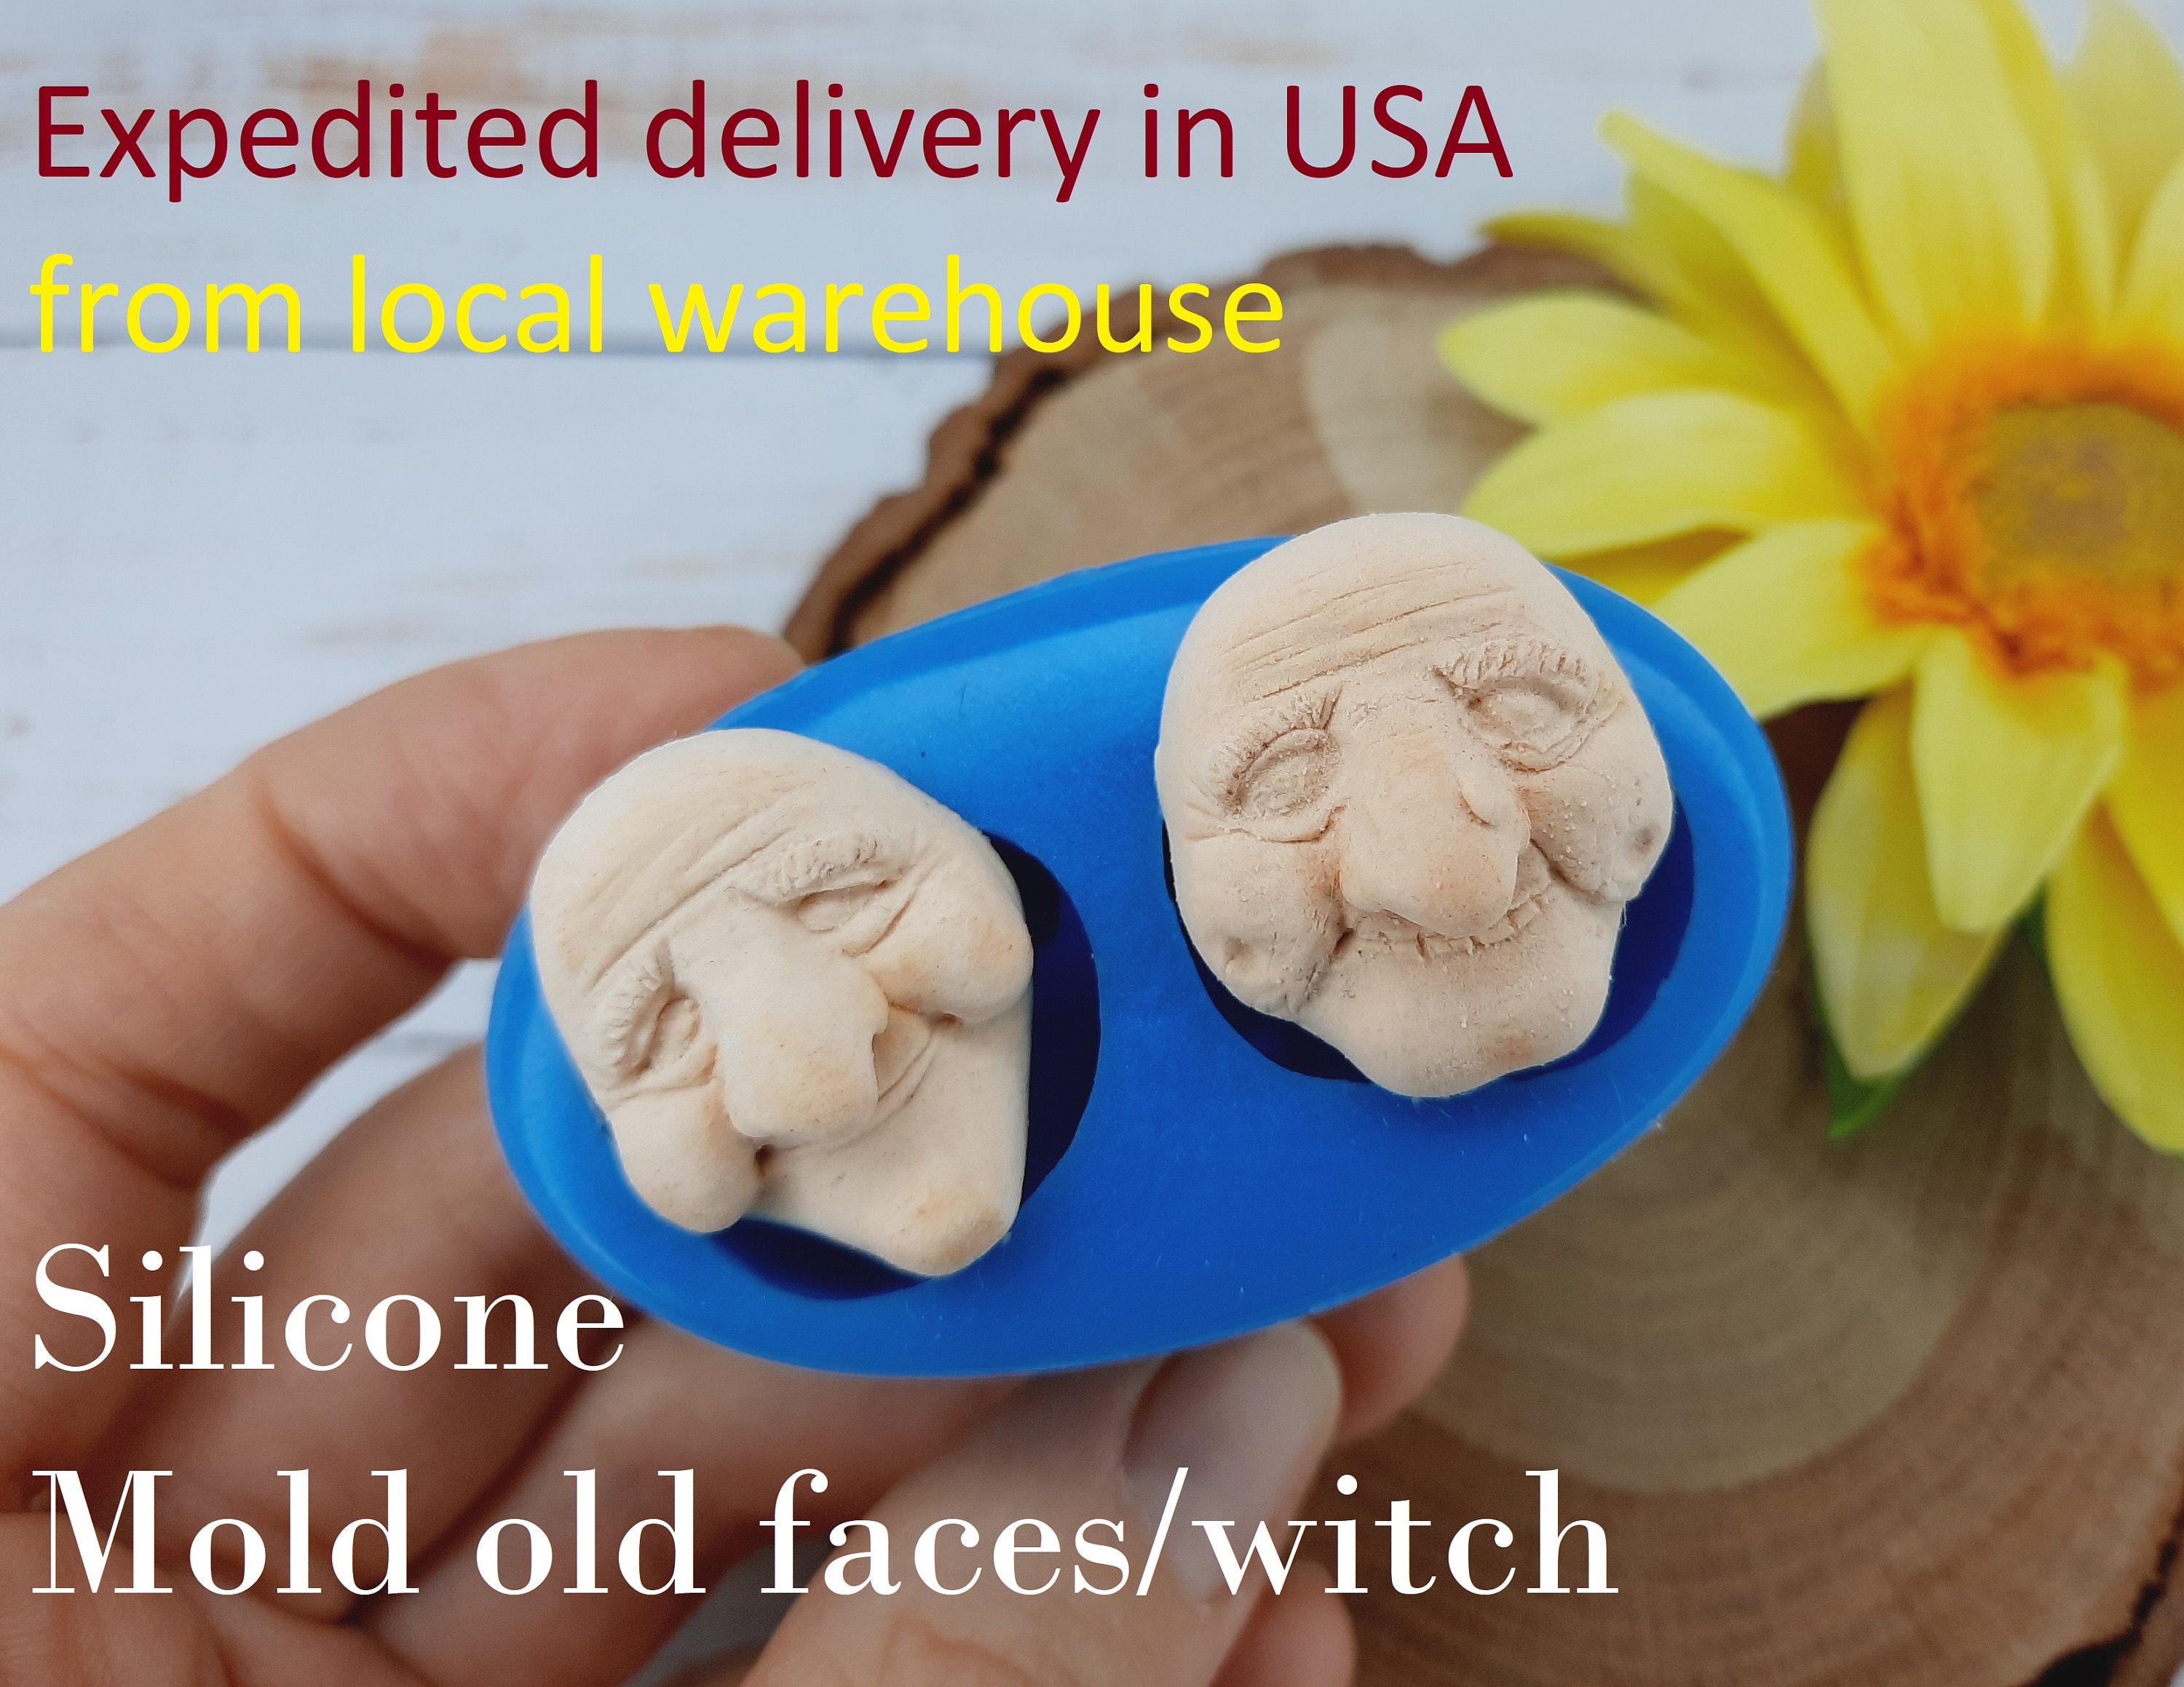 3D Baby Face Food Grade Silicone Mold. Fondant Cake Decorating Tool. Resin  Mold for Arts and Crafts. Oven Safe up to 400 Degrees F 